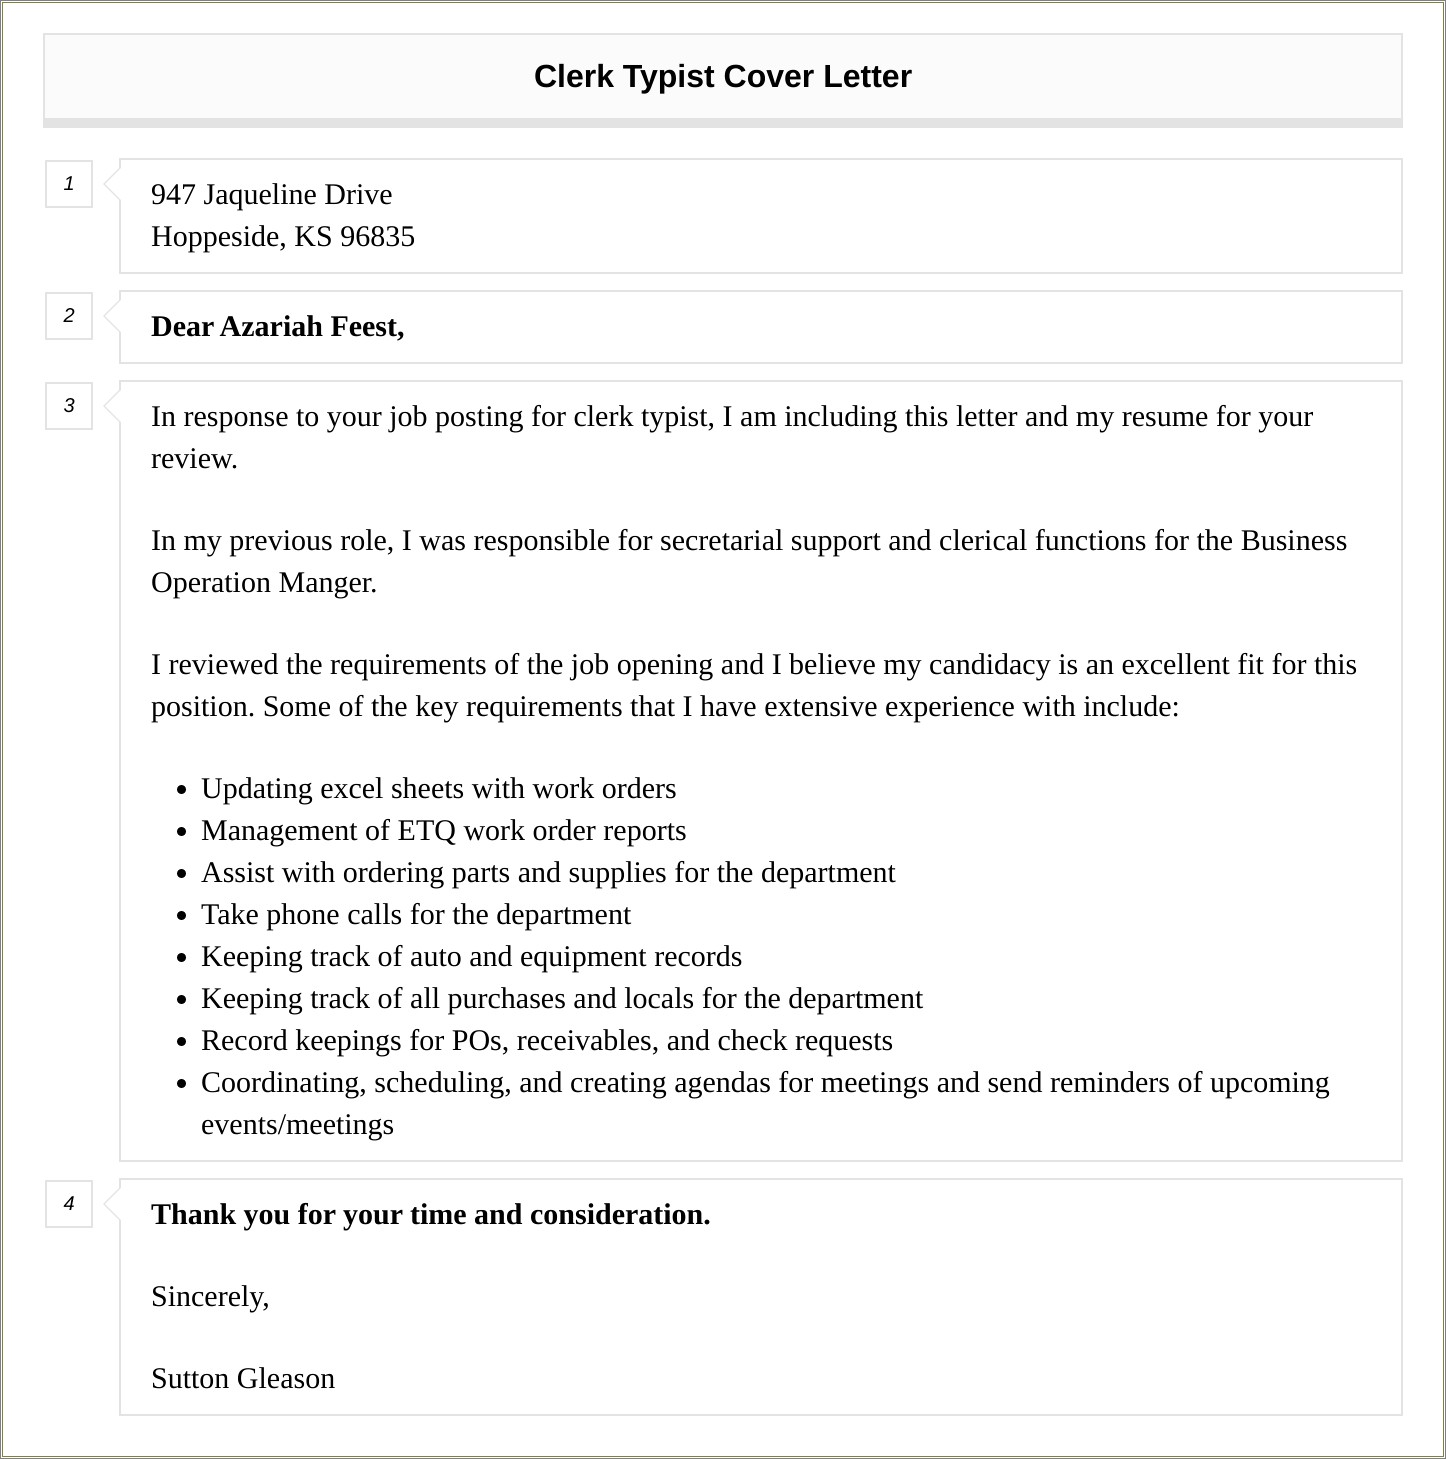 Resume Cover Letter For Clerical Work